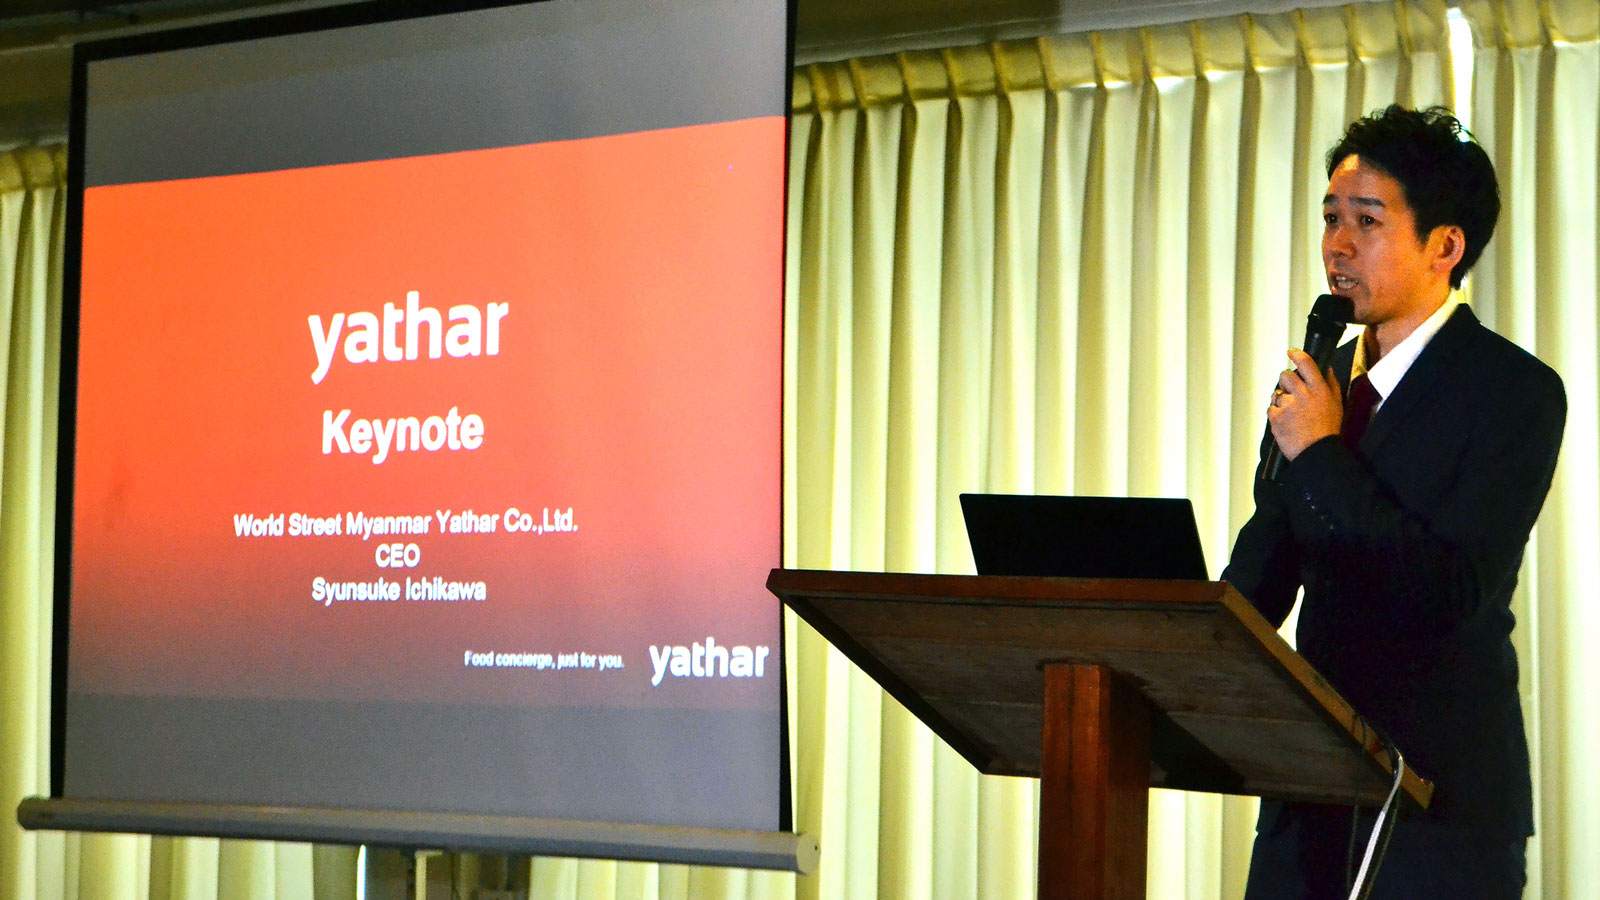 Opening of new yathar office in Mandalay